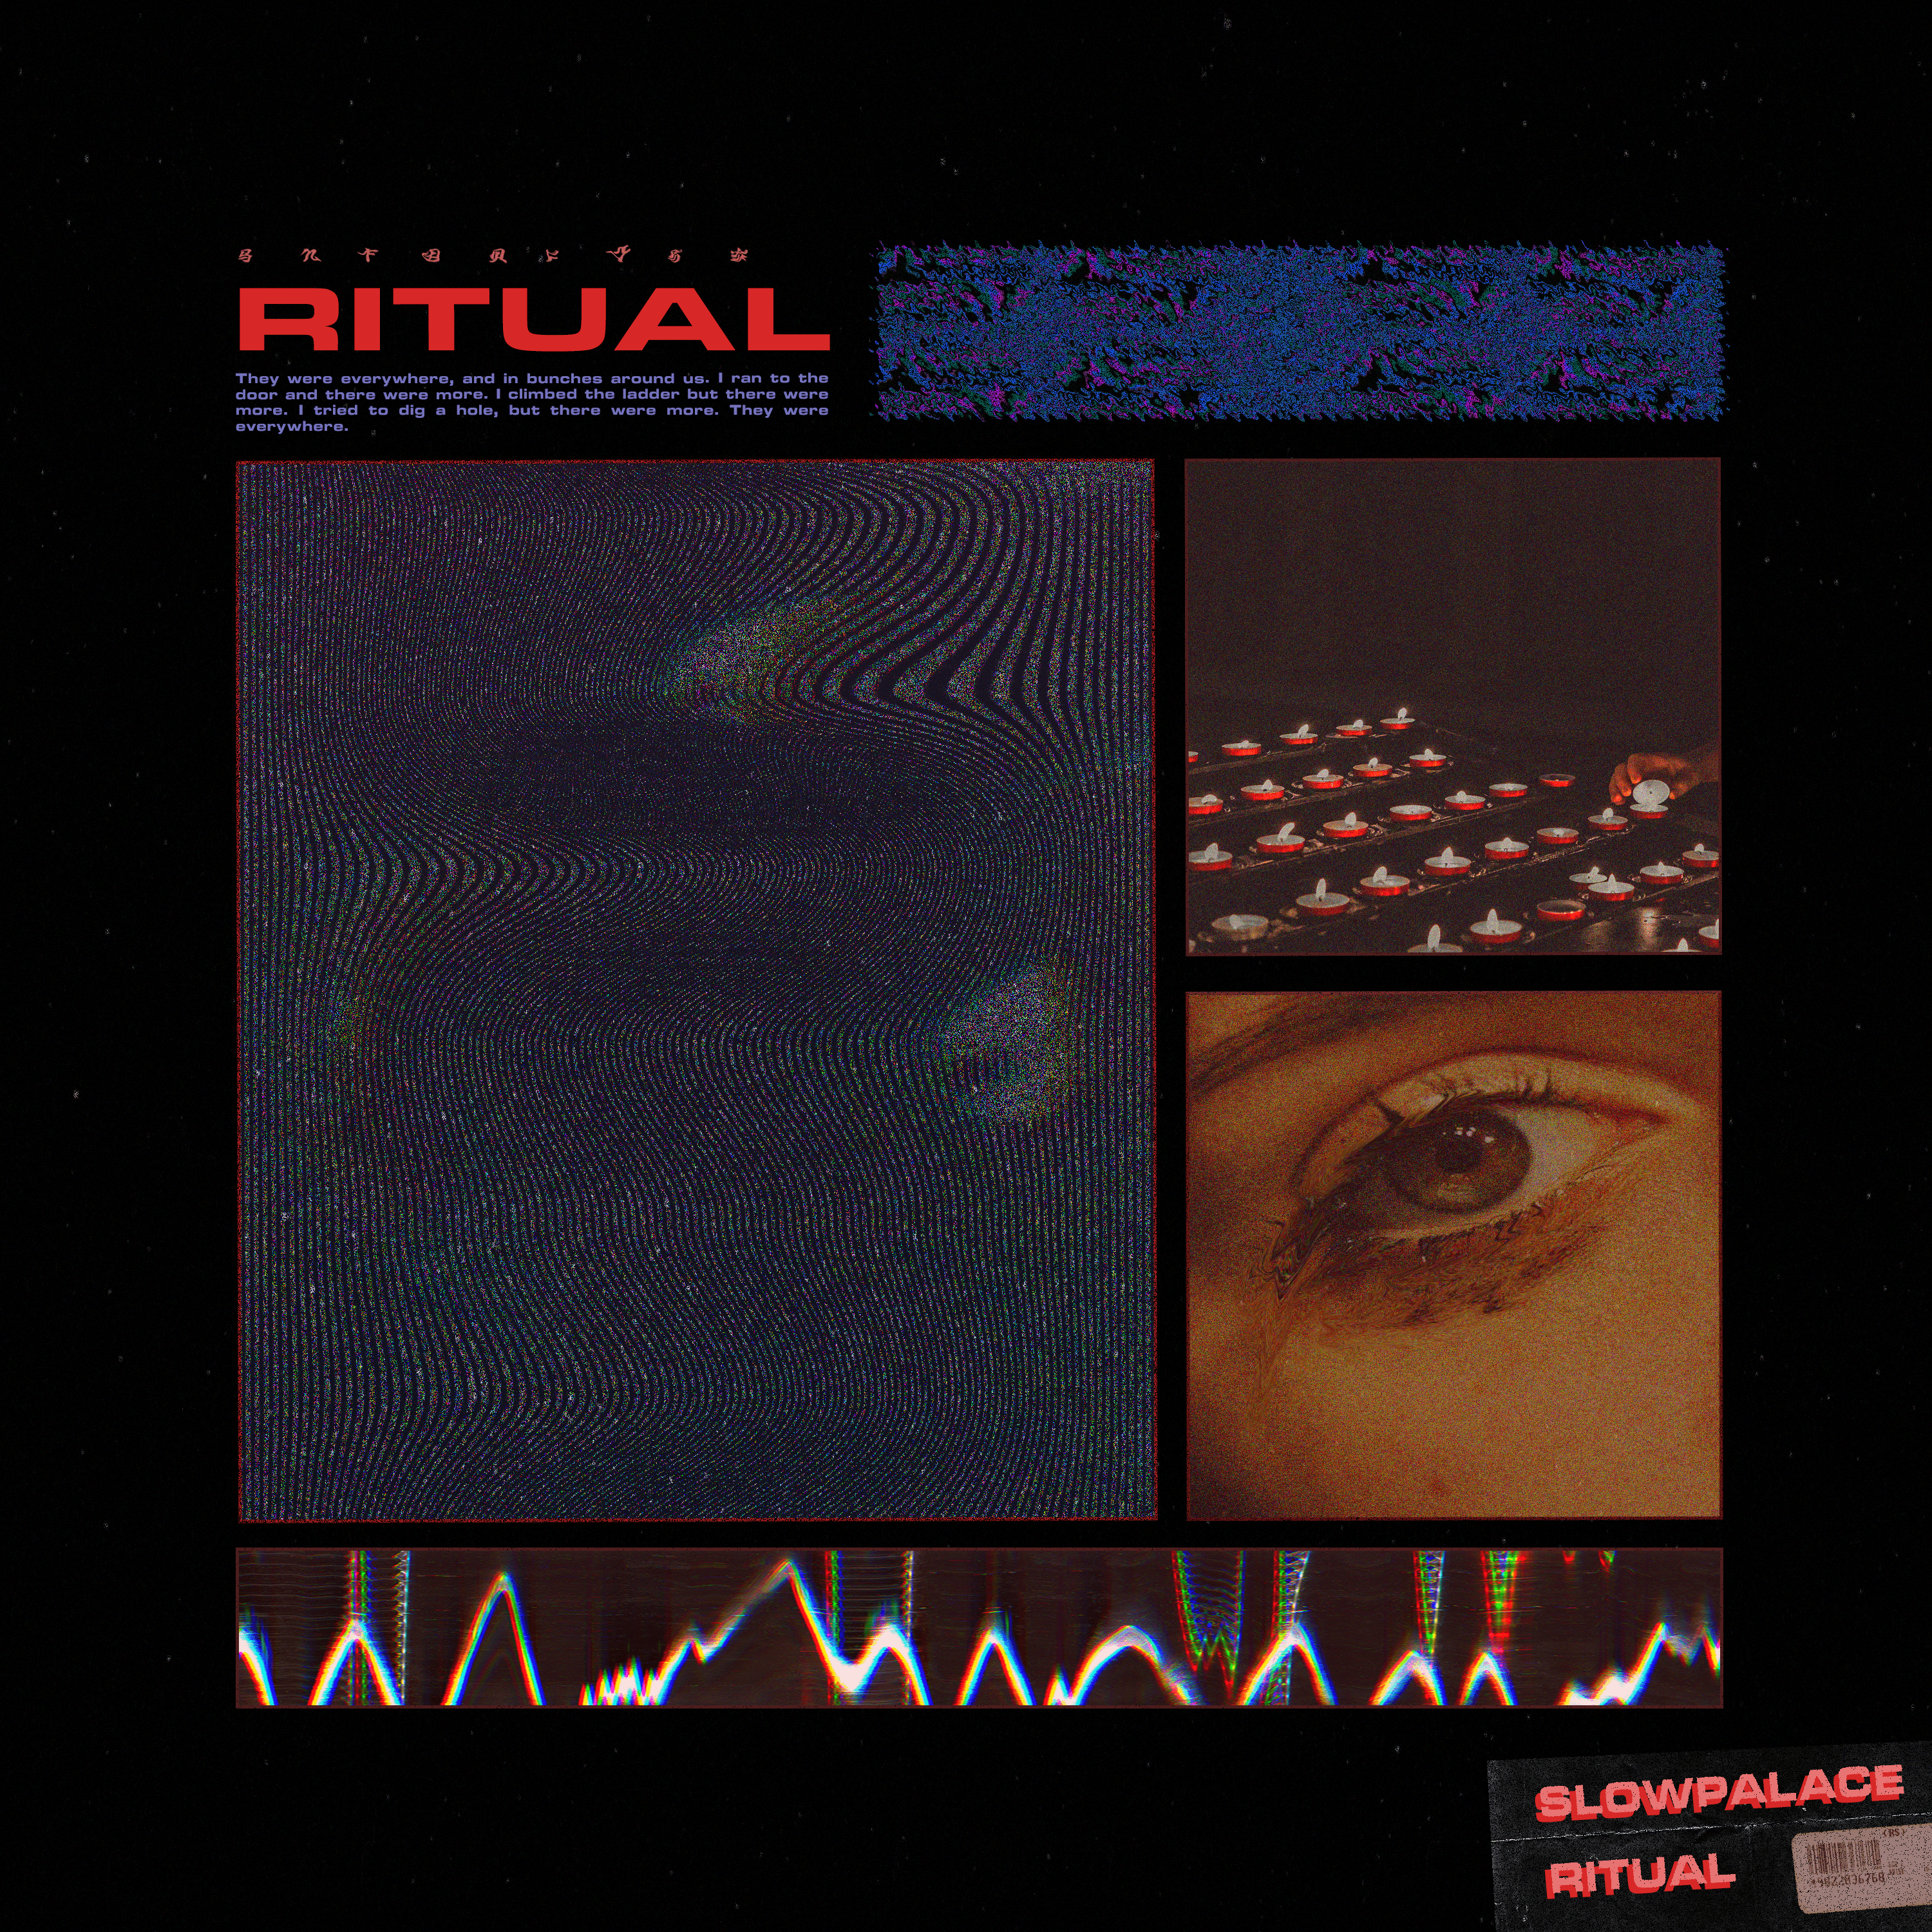 Cover art for Ritual by Slowpalace